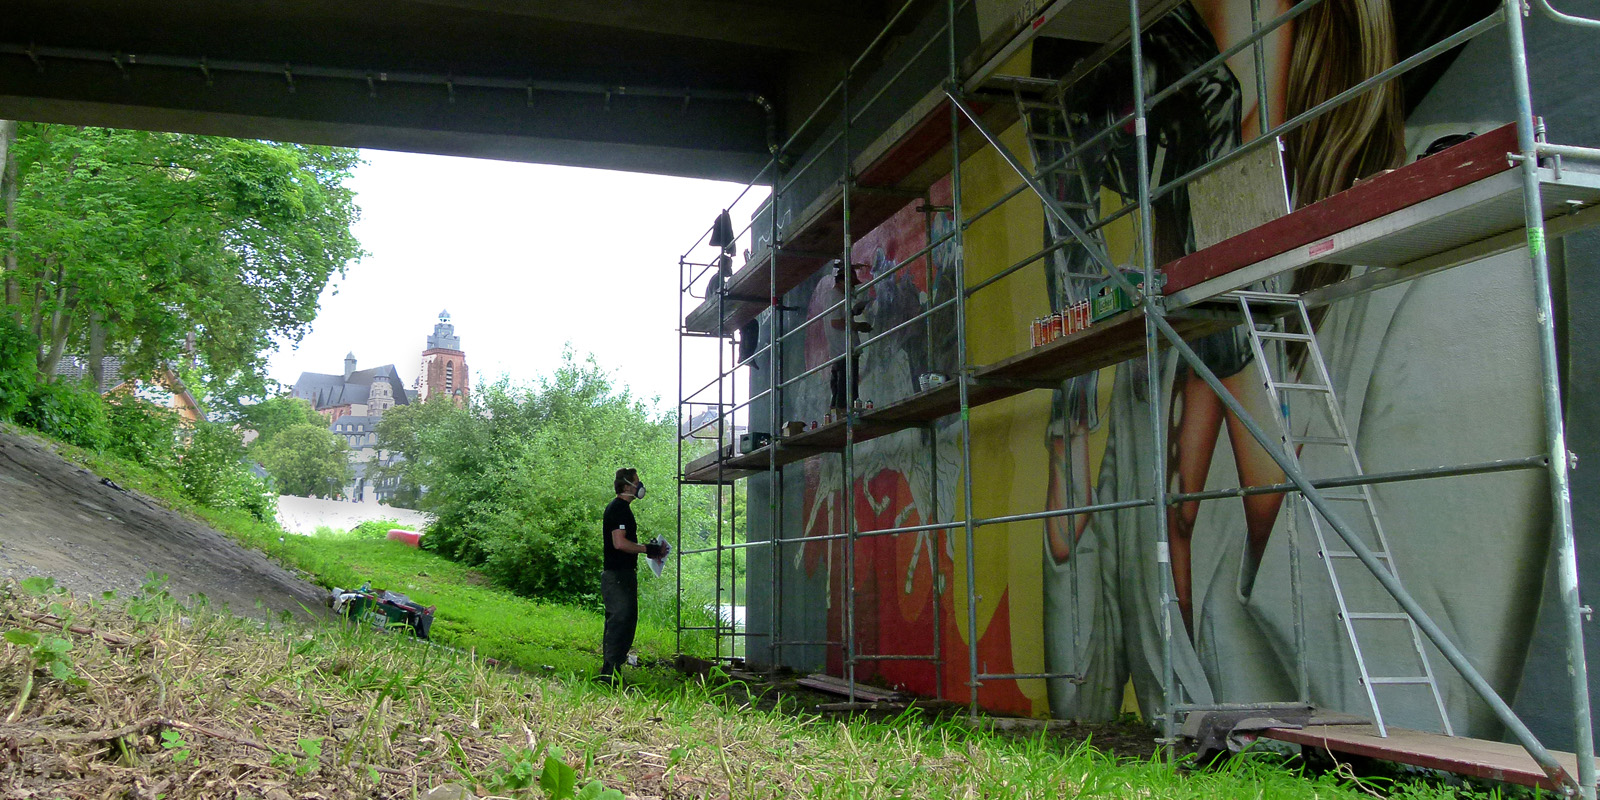 The official Hessentag wall 2012 in Wetzlar, painted by 3Steps and Mord182, about 6 m high and over 15 m long.